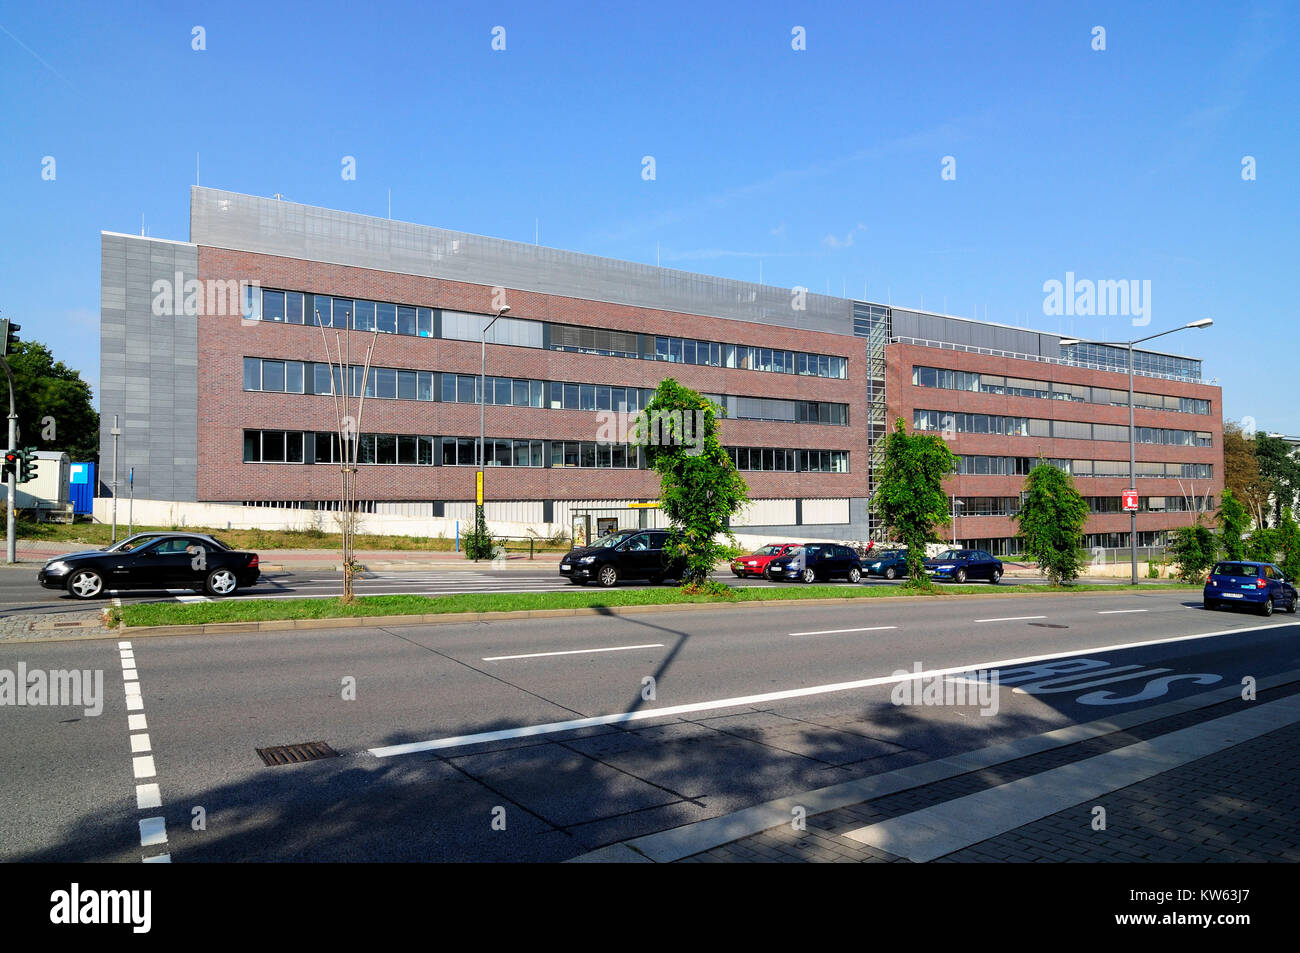 New building chemical institutes of the University of Technology, Europe, europe, europaen, European, European, European, European, country, country,  Stock Photo